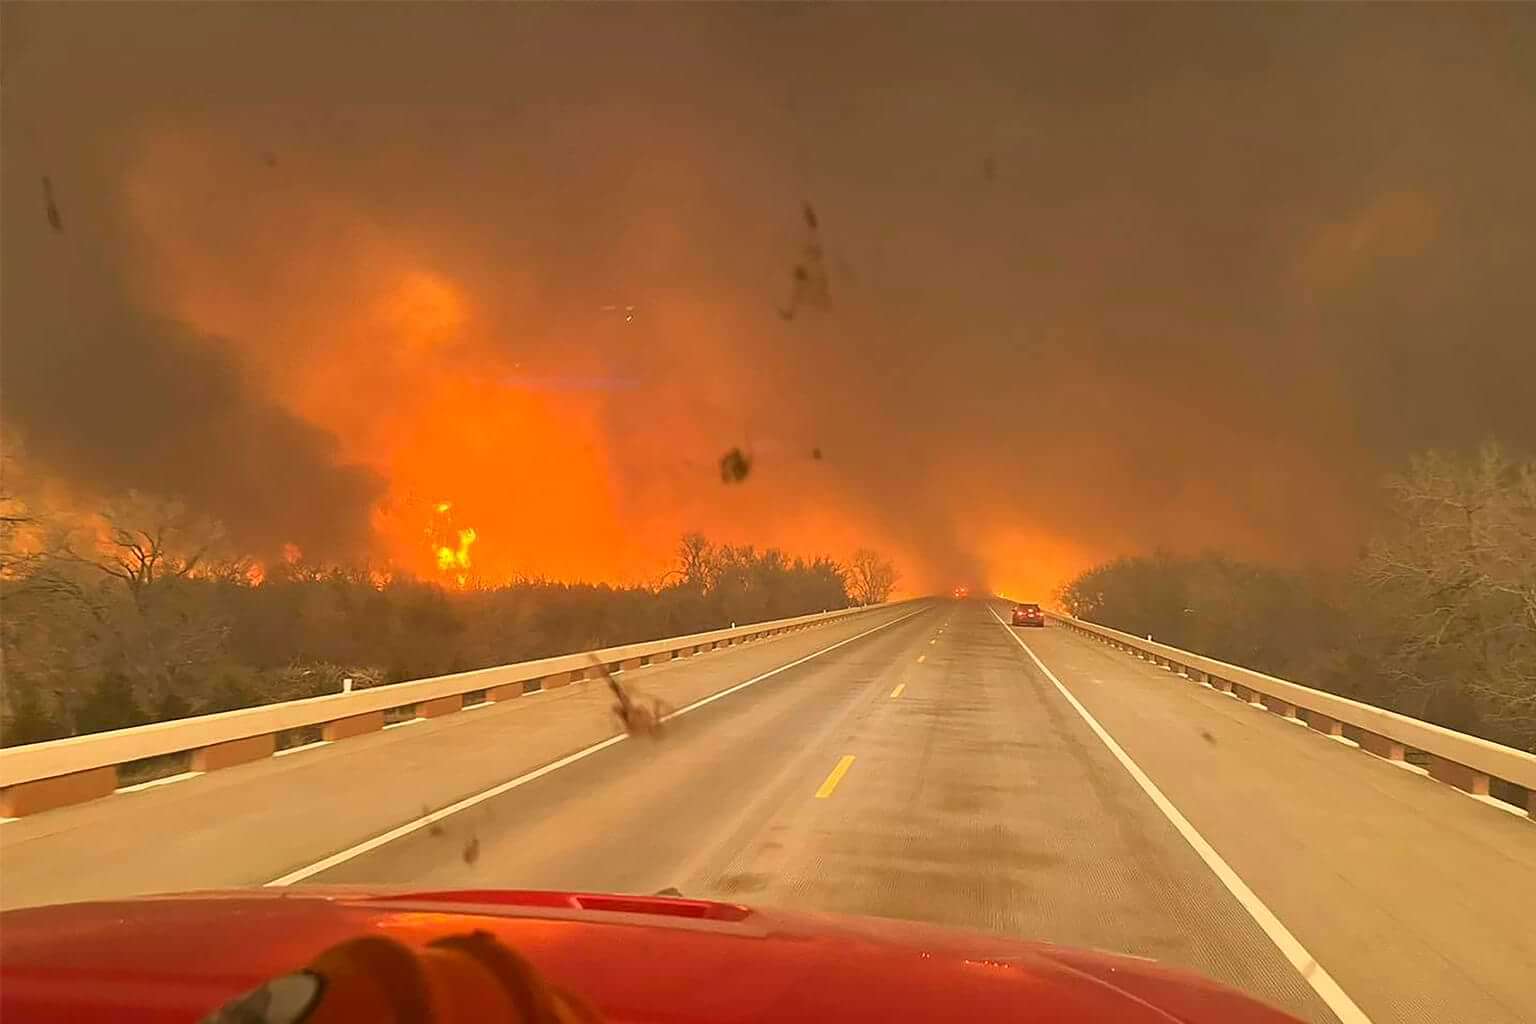 The Texas wildfires What we know, what we don’t know (yet), and what